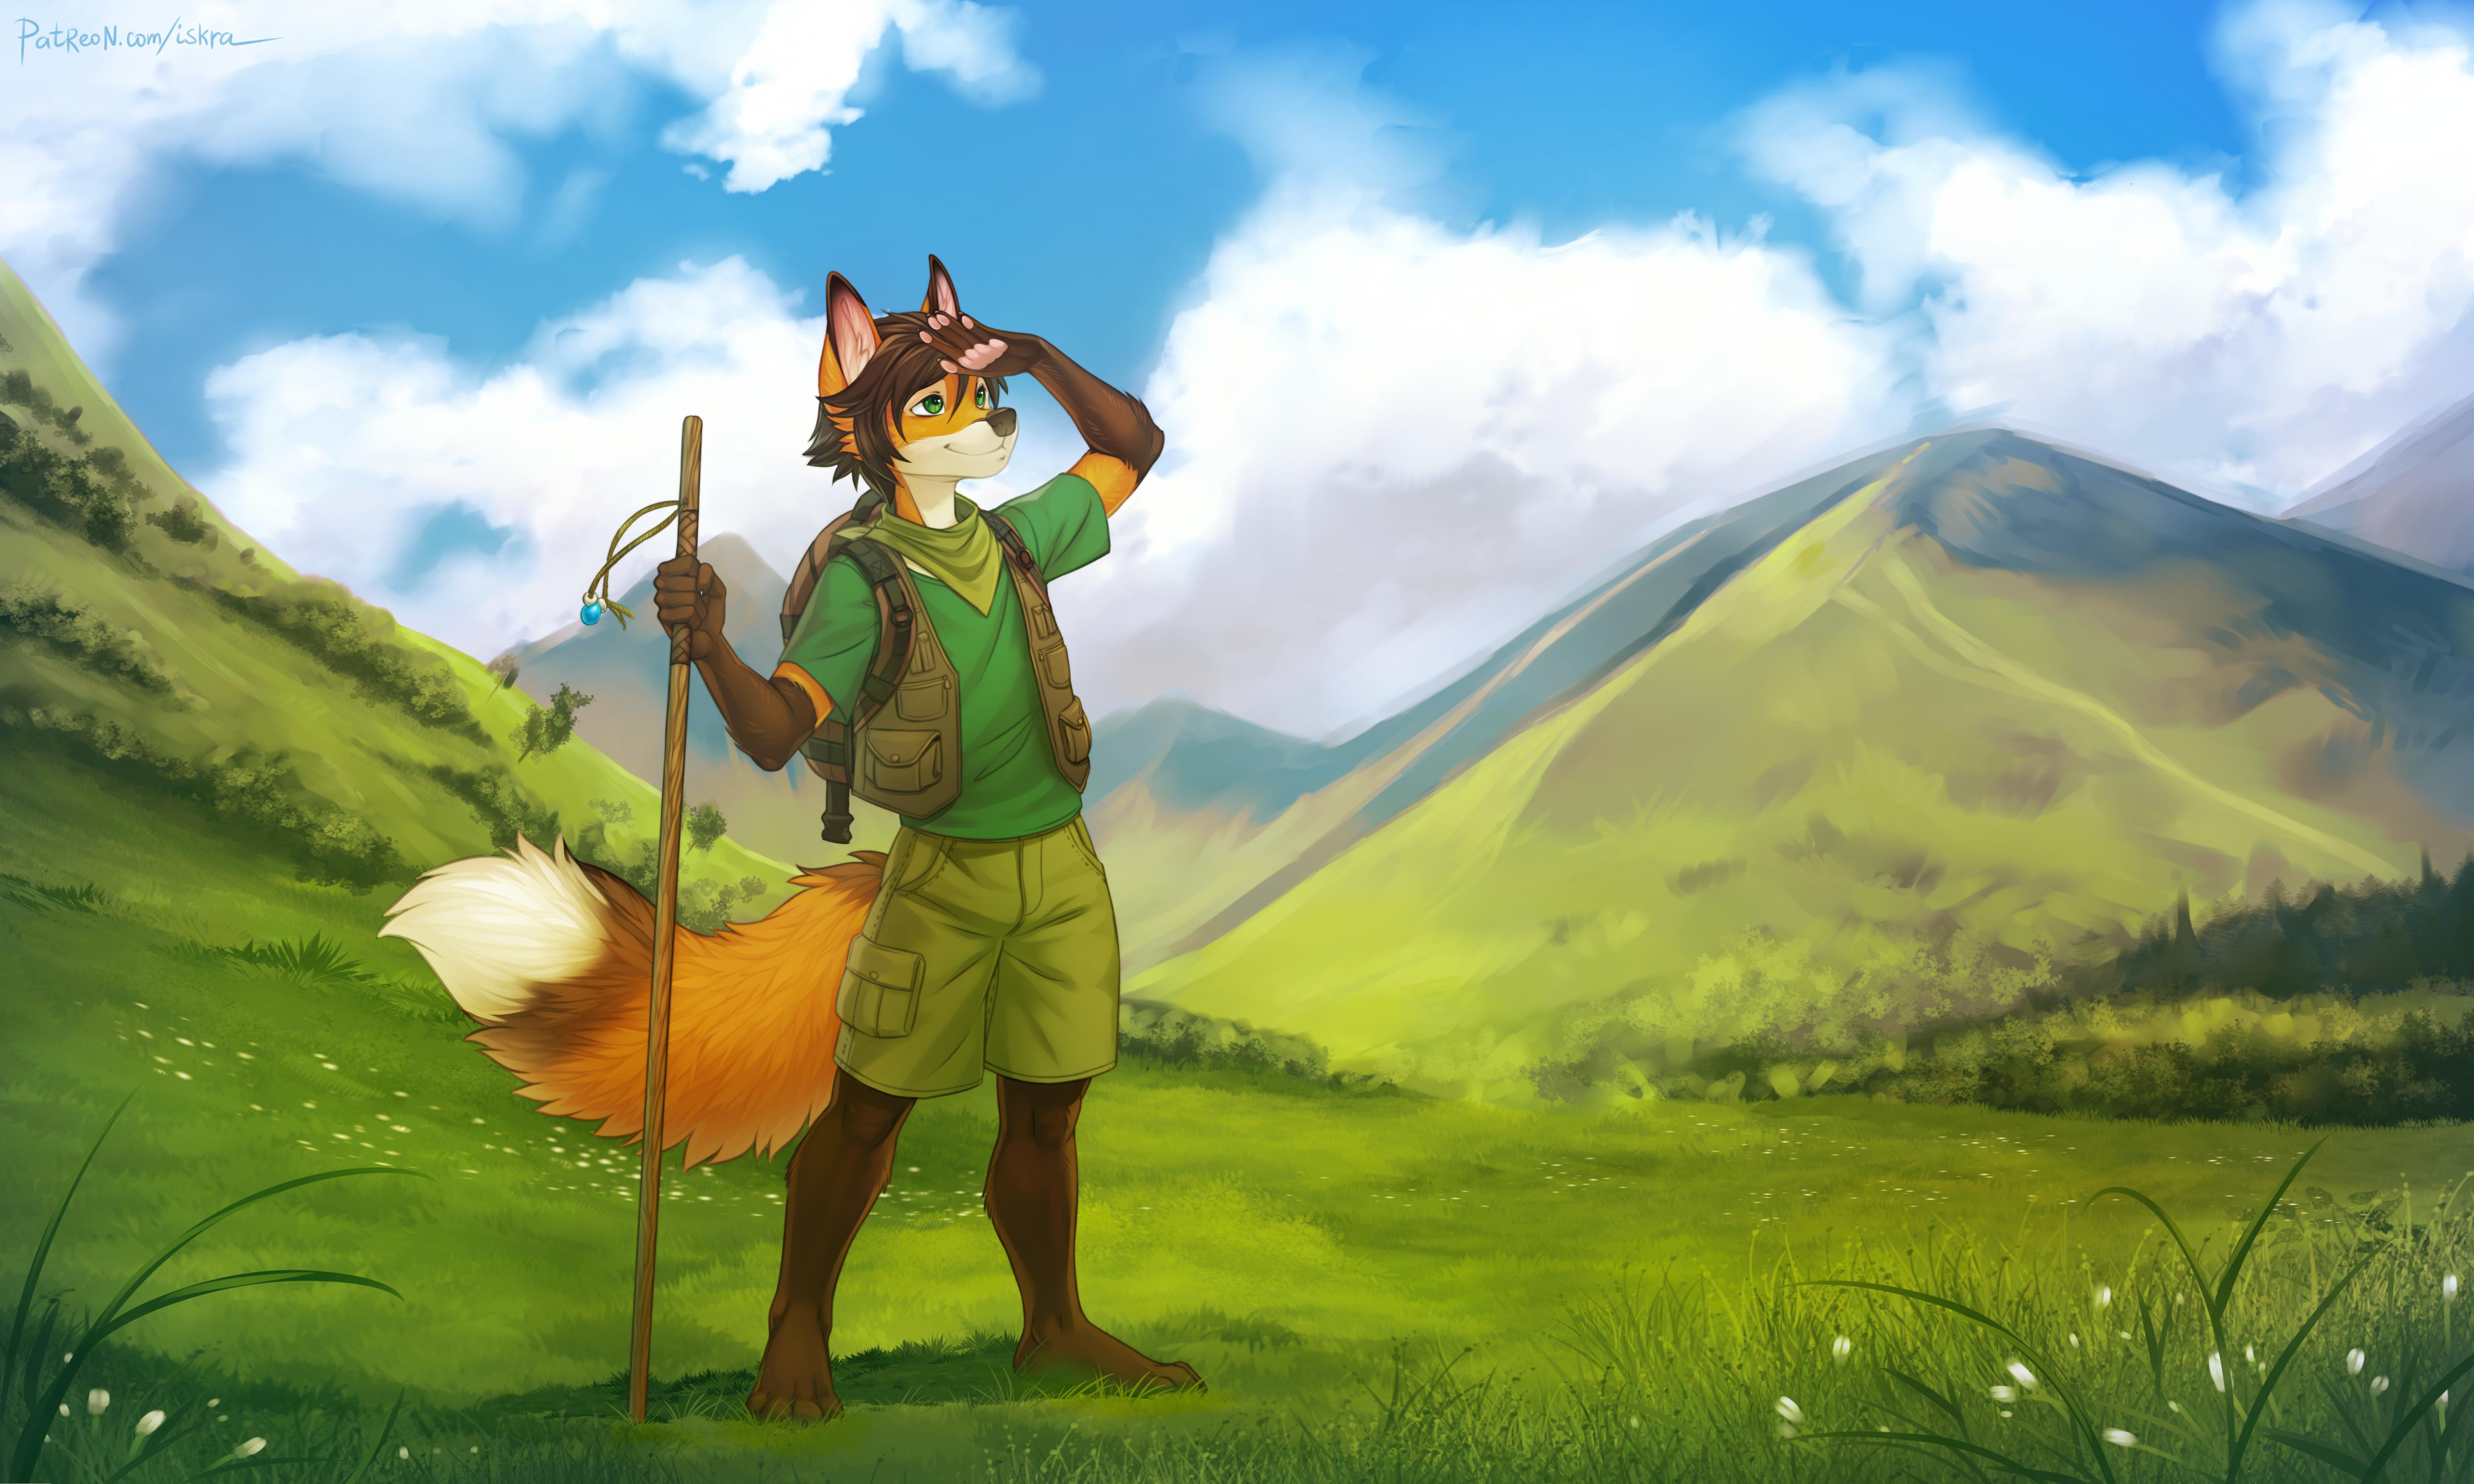 Furry Anthro Fox Ears Mountains Grass Clouds Tail 5000x3000